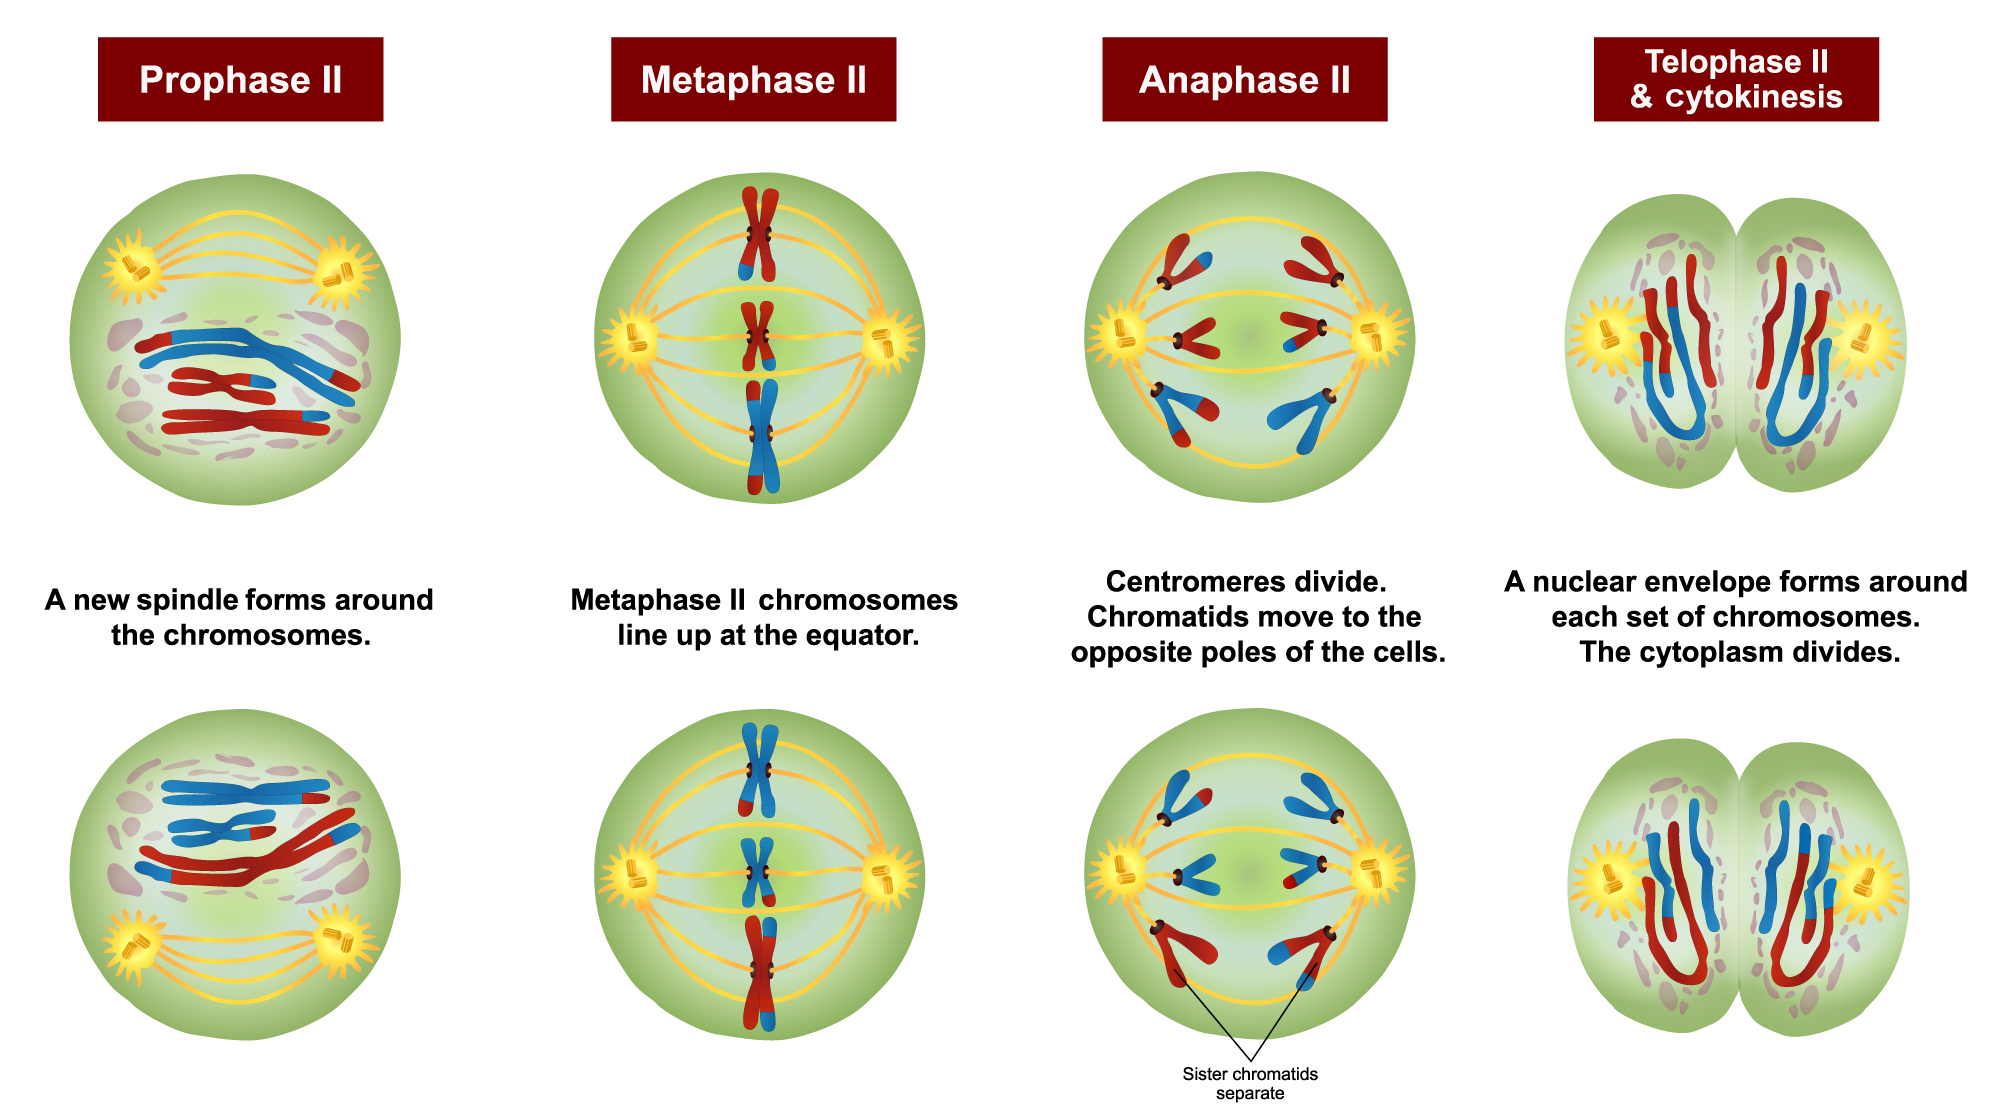 Diagram illustrating the stages of meiosis two: Lining up of the chromosomes in the center of each of two cells, separation of the chromatids in each chromosome, and dividing of the cell into two daughter cells.